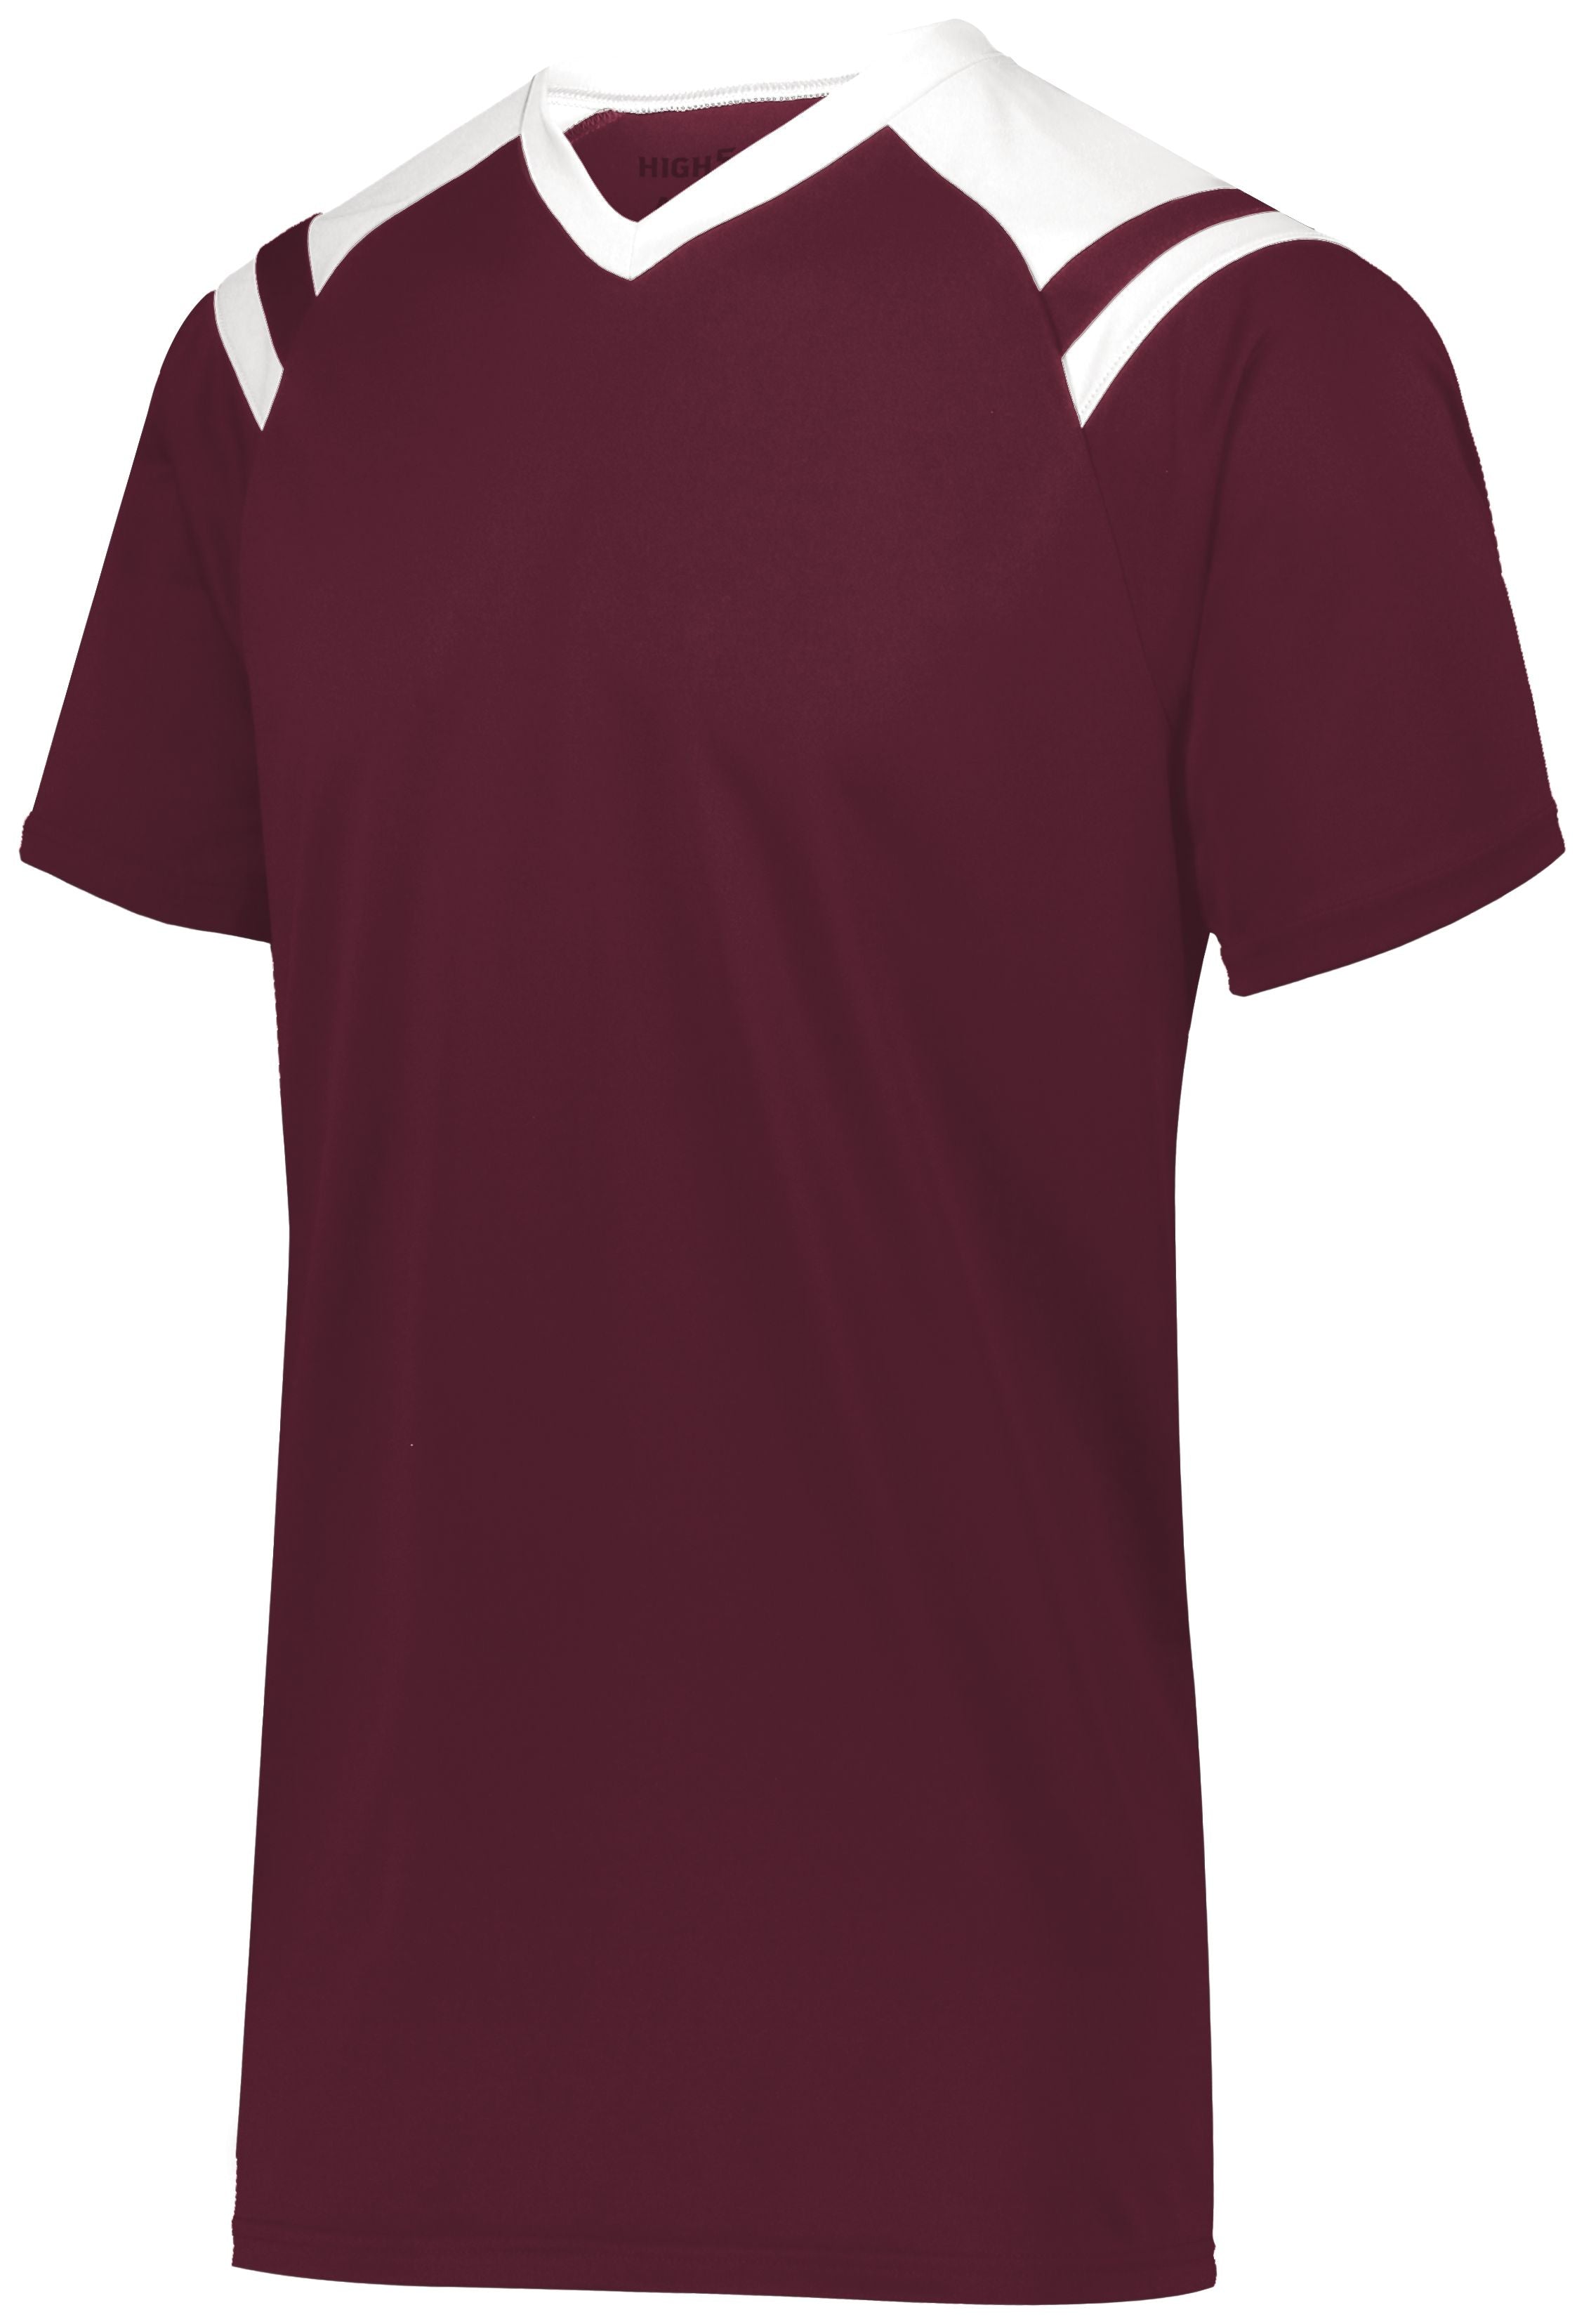 High 5 Youth Sheffield Jersey in Maroon/White  -Part of the Youth, Youth-Jersey, High5-Products, Soccer, Shirts, All-Sports-1, Sheffield-Soccer-Jerseys product lines at KanaleyCreations.com